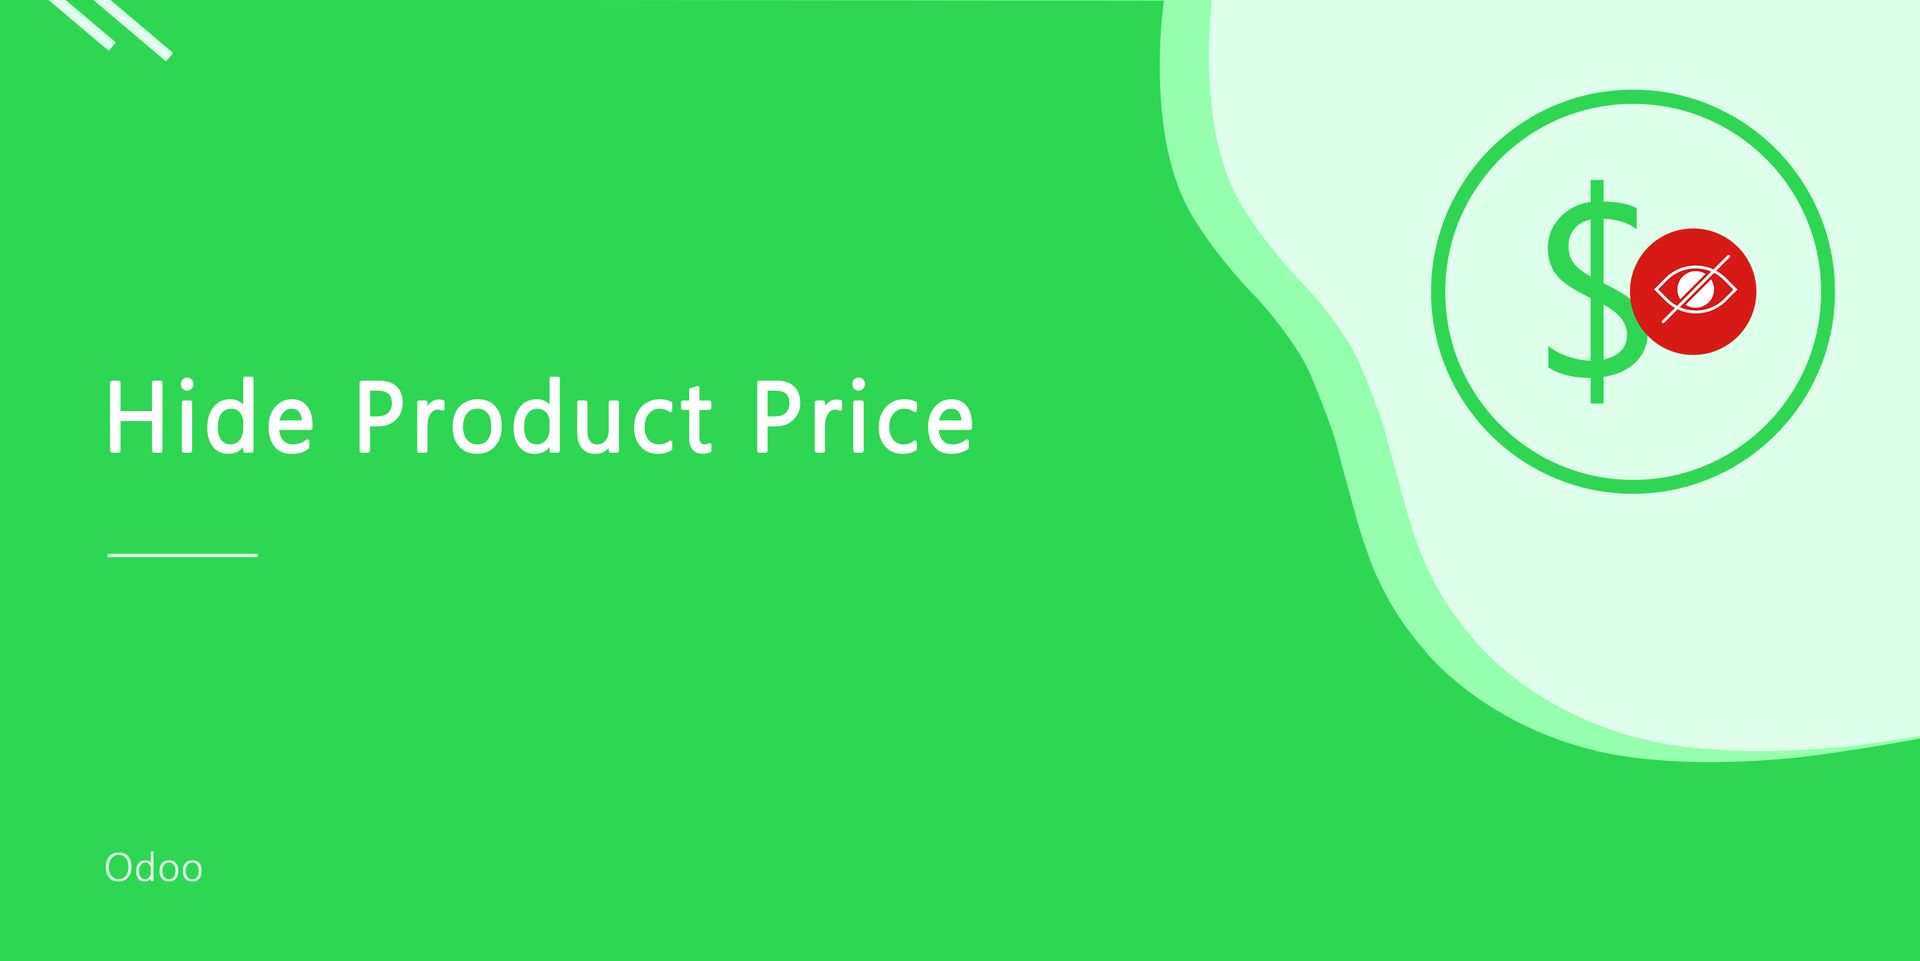 Hide Product Price
